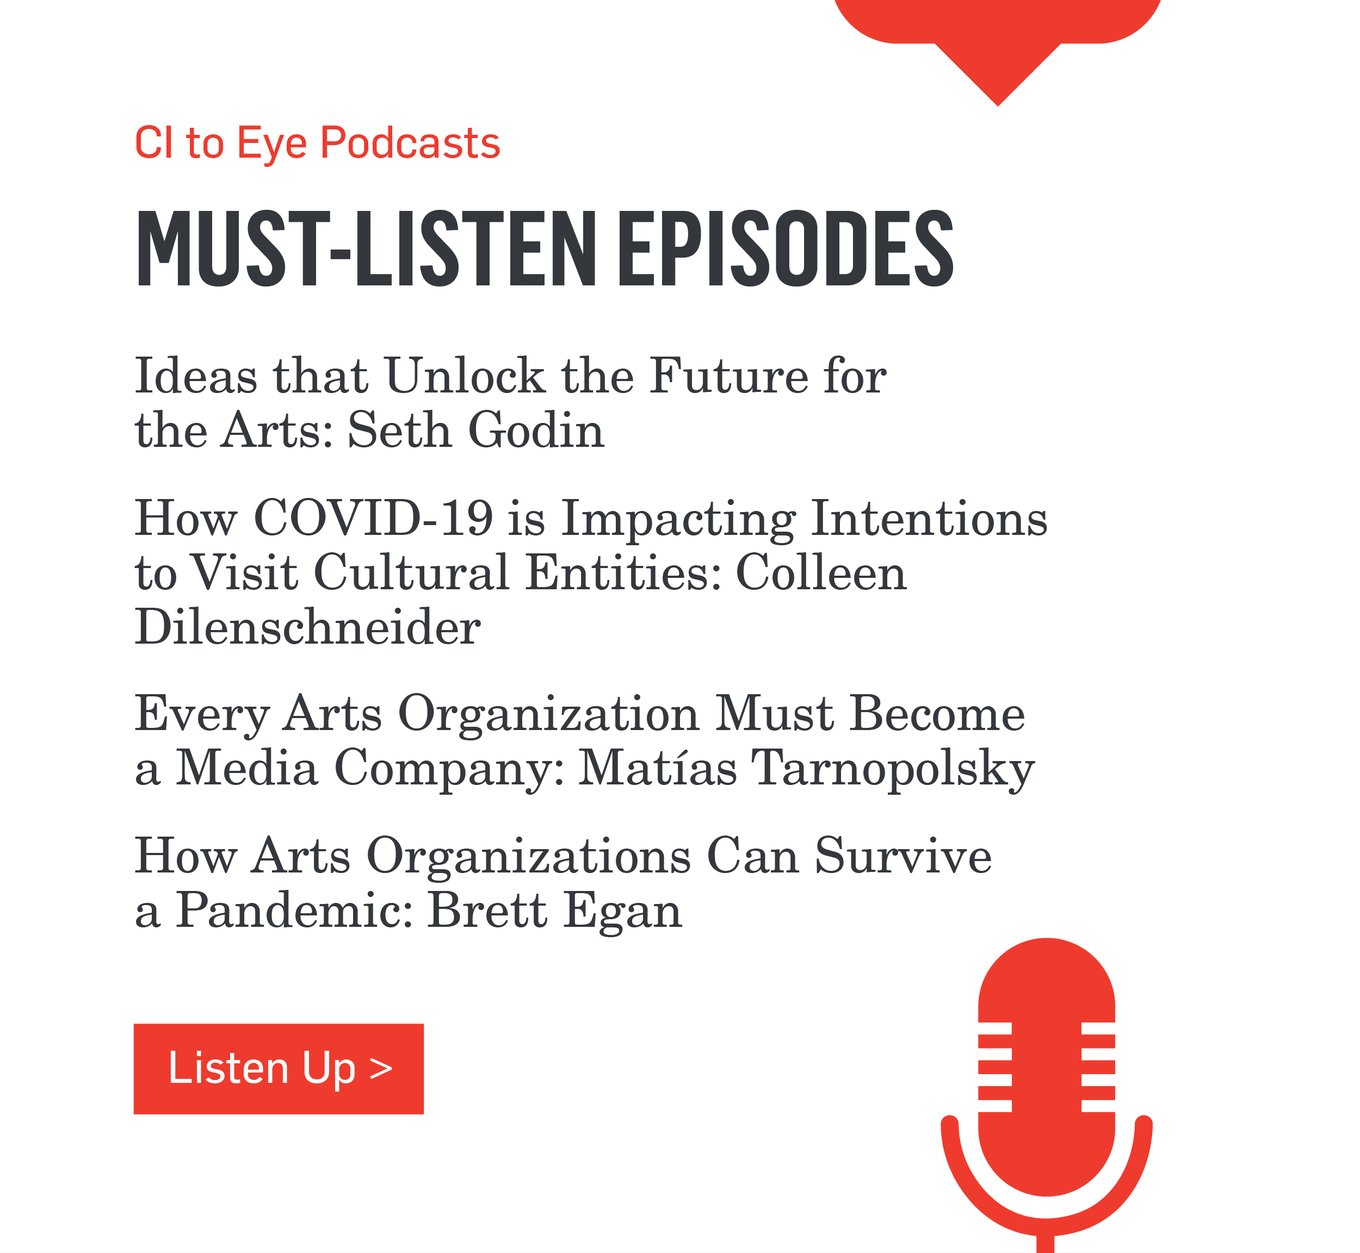 CI to Eye Podcasts - MUST-LISTEN EPISODES - Ideas that Unlock the Future for the Arts: Seth Godin - How COVID-19 is Impacting Intentions to Visit Cultural Entities: Colleen Dilenschneider - Every Arts Organization Must Become a Media Company: Matías Tarnopolsky - How Arts Organizations Can Survive a Pandemic: Brett Egan >>>Listen Up>>>